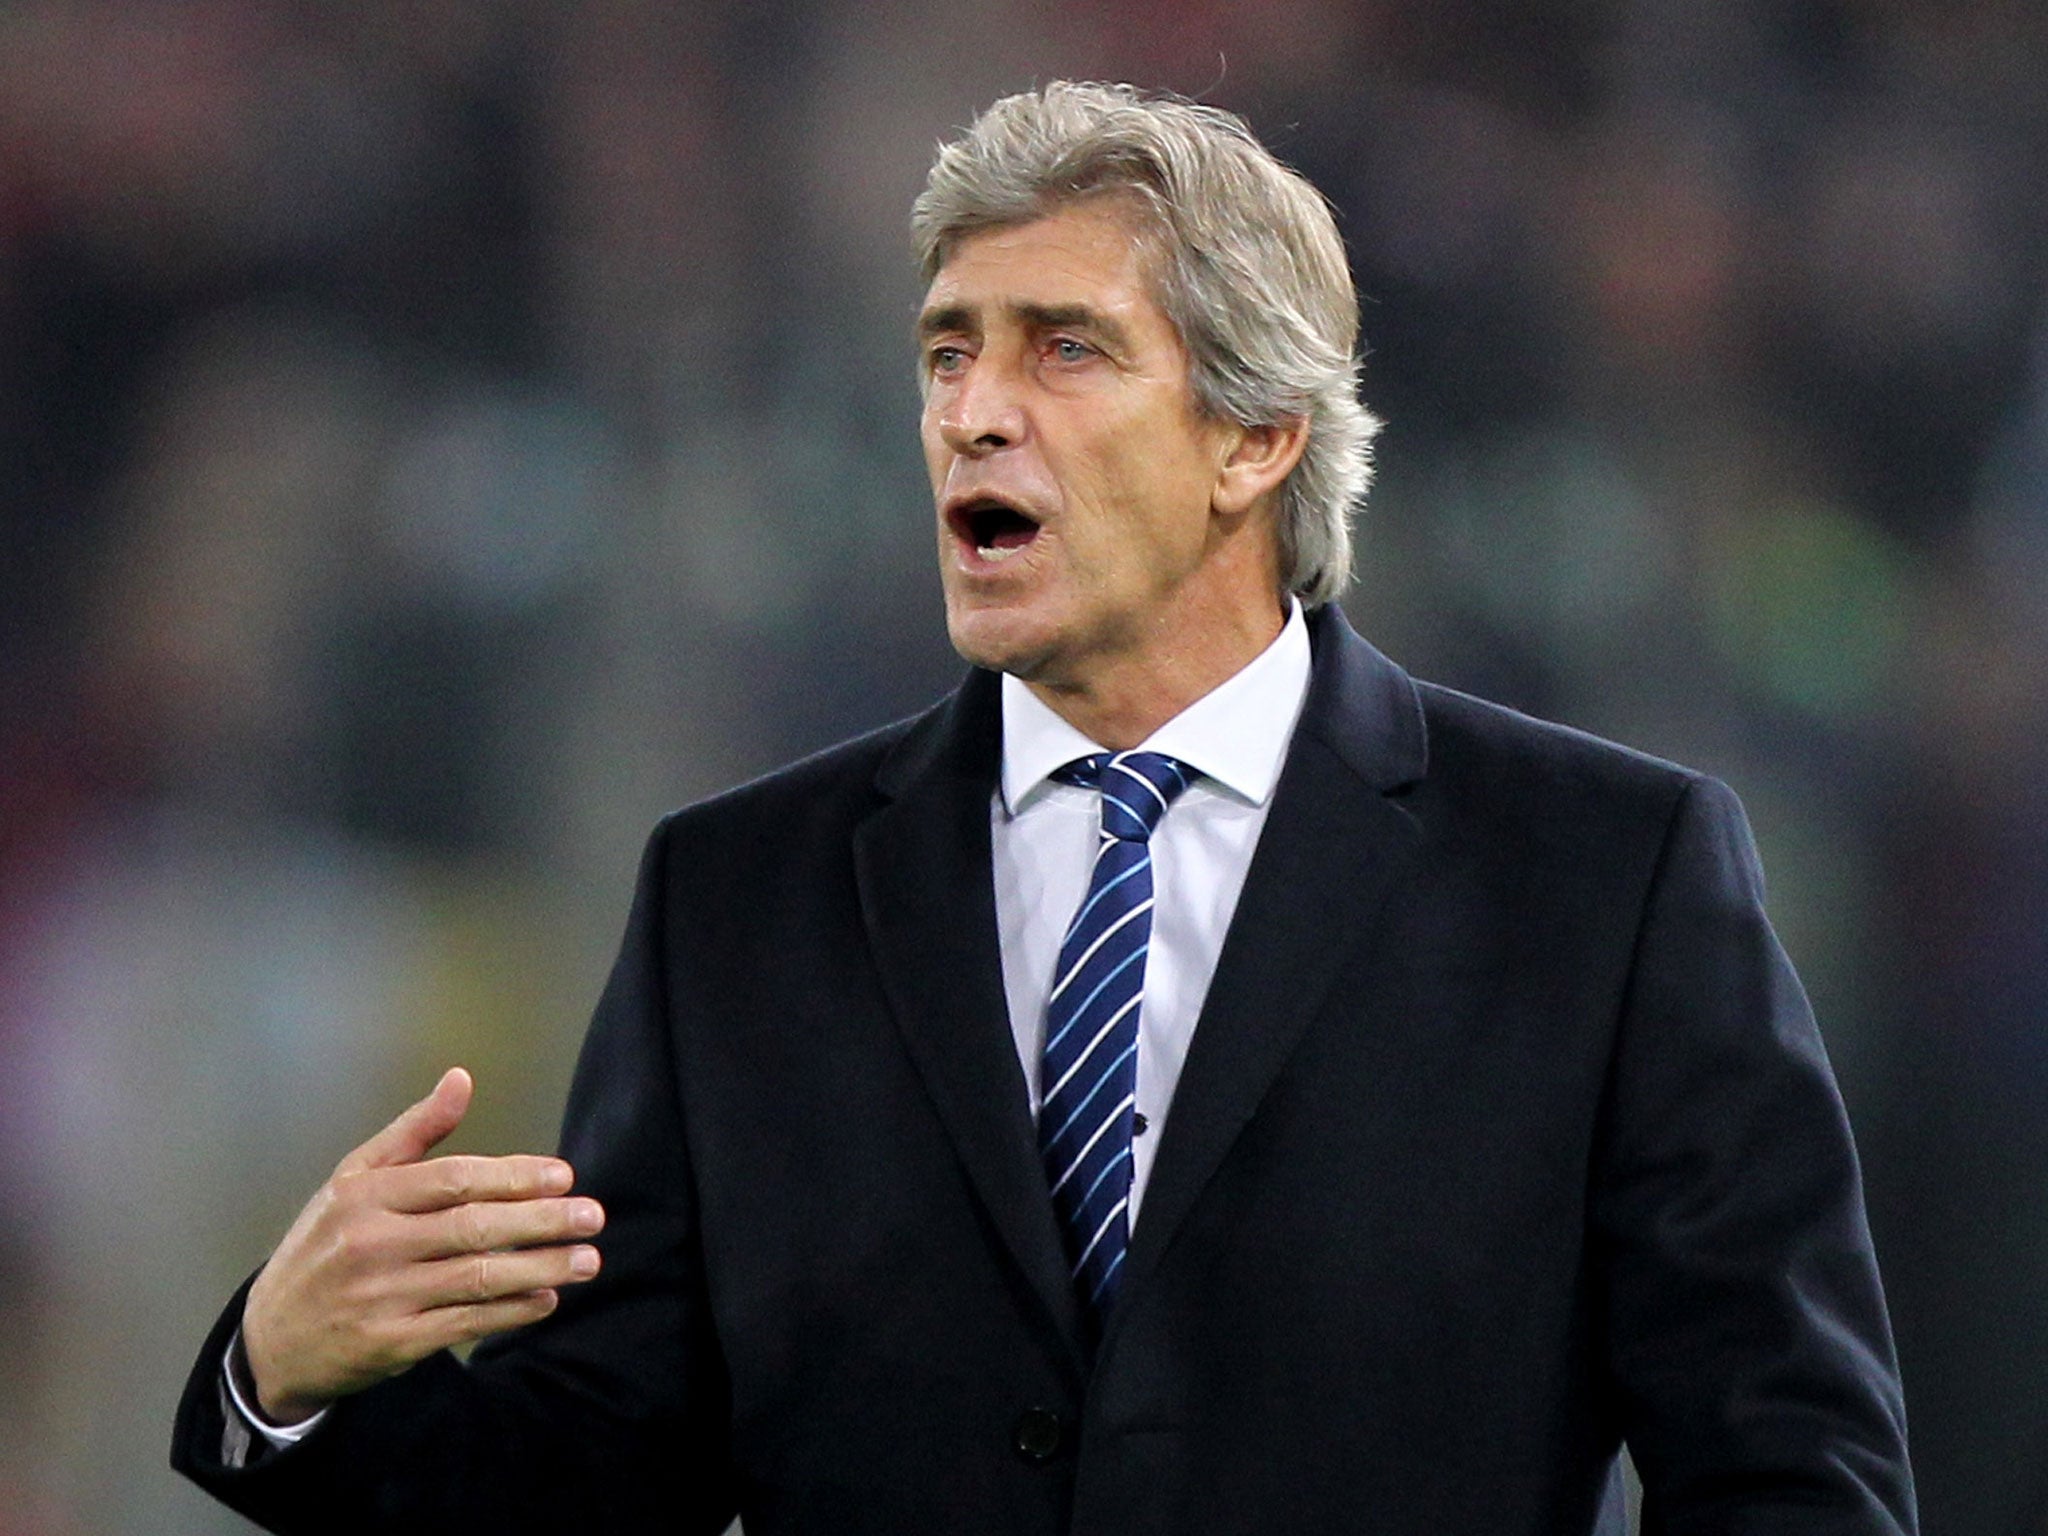 Manuel Pellegrini reacts on the touchline in Rome